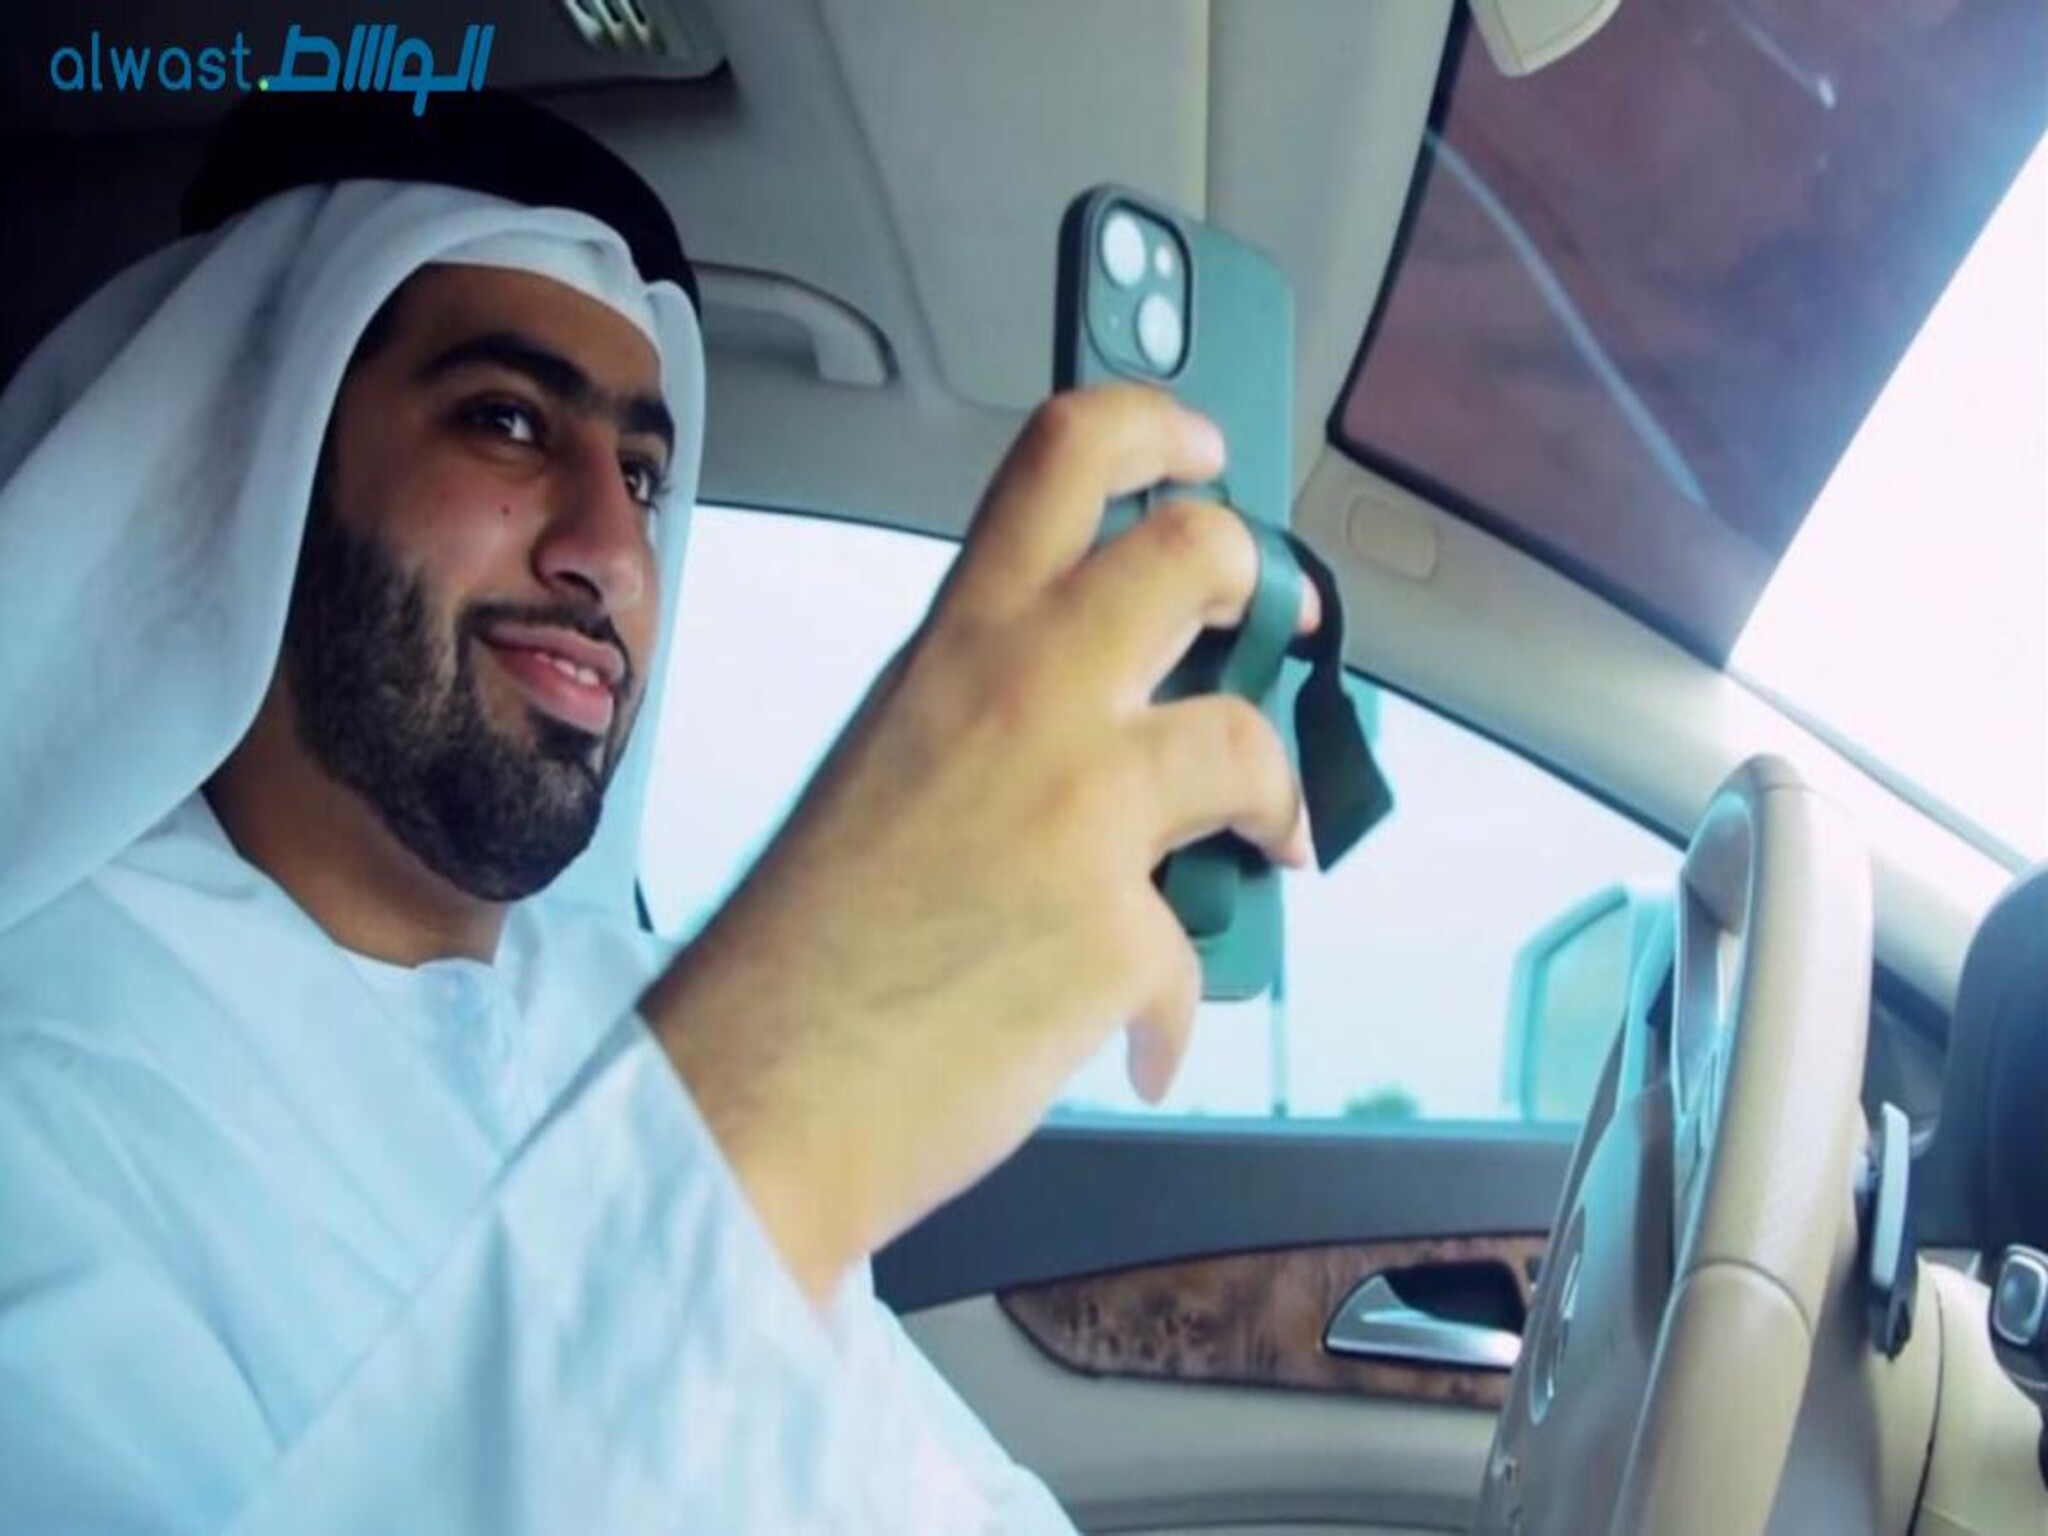 UAE Police caution motorists to avoid texting while driving for safety reasons